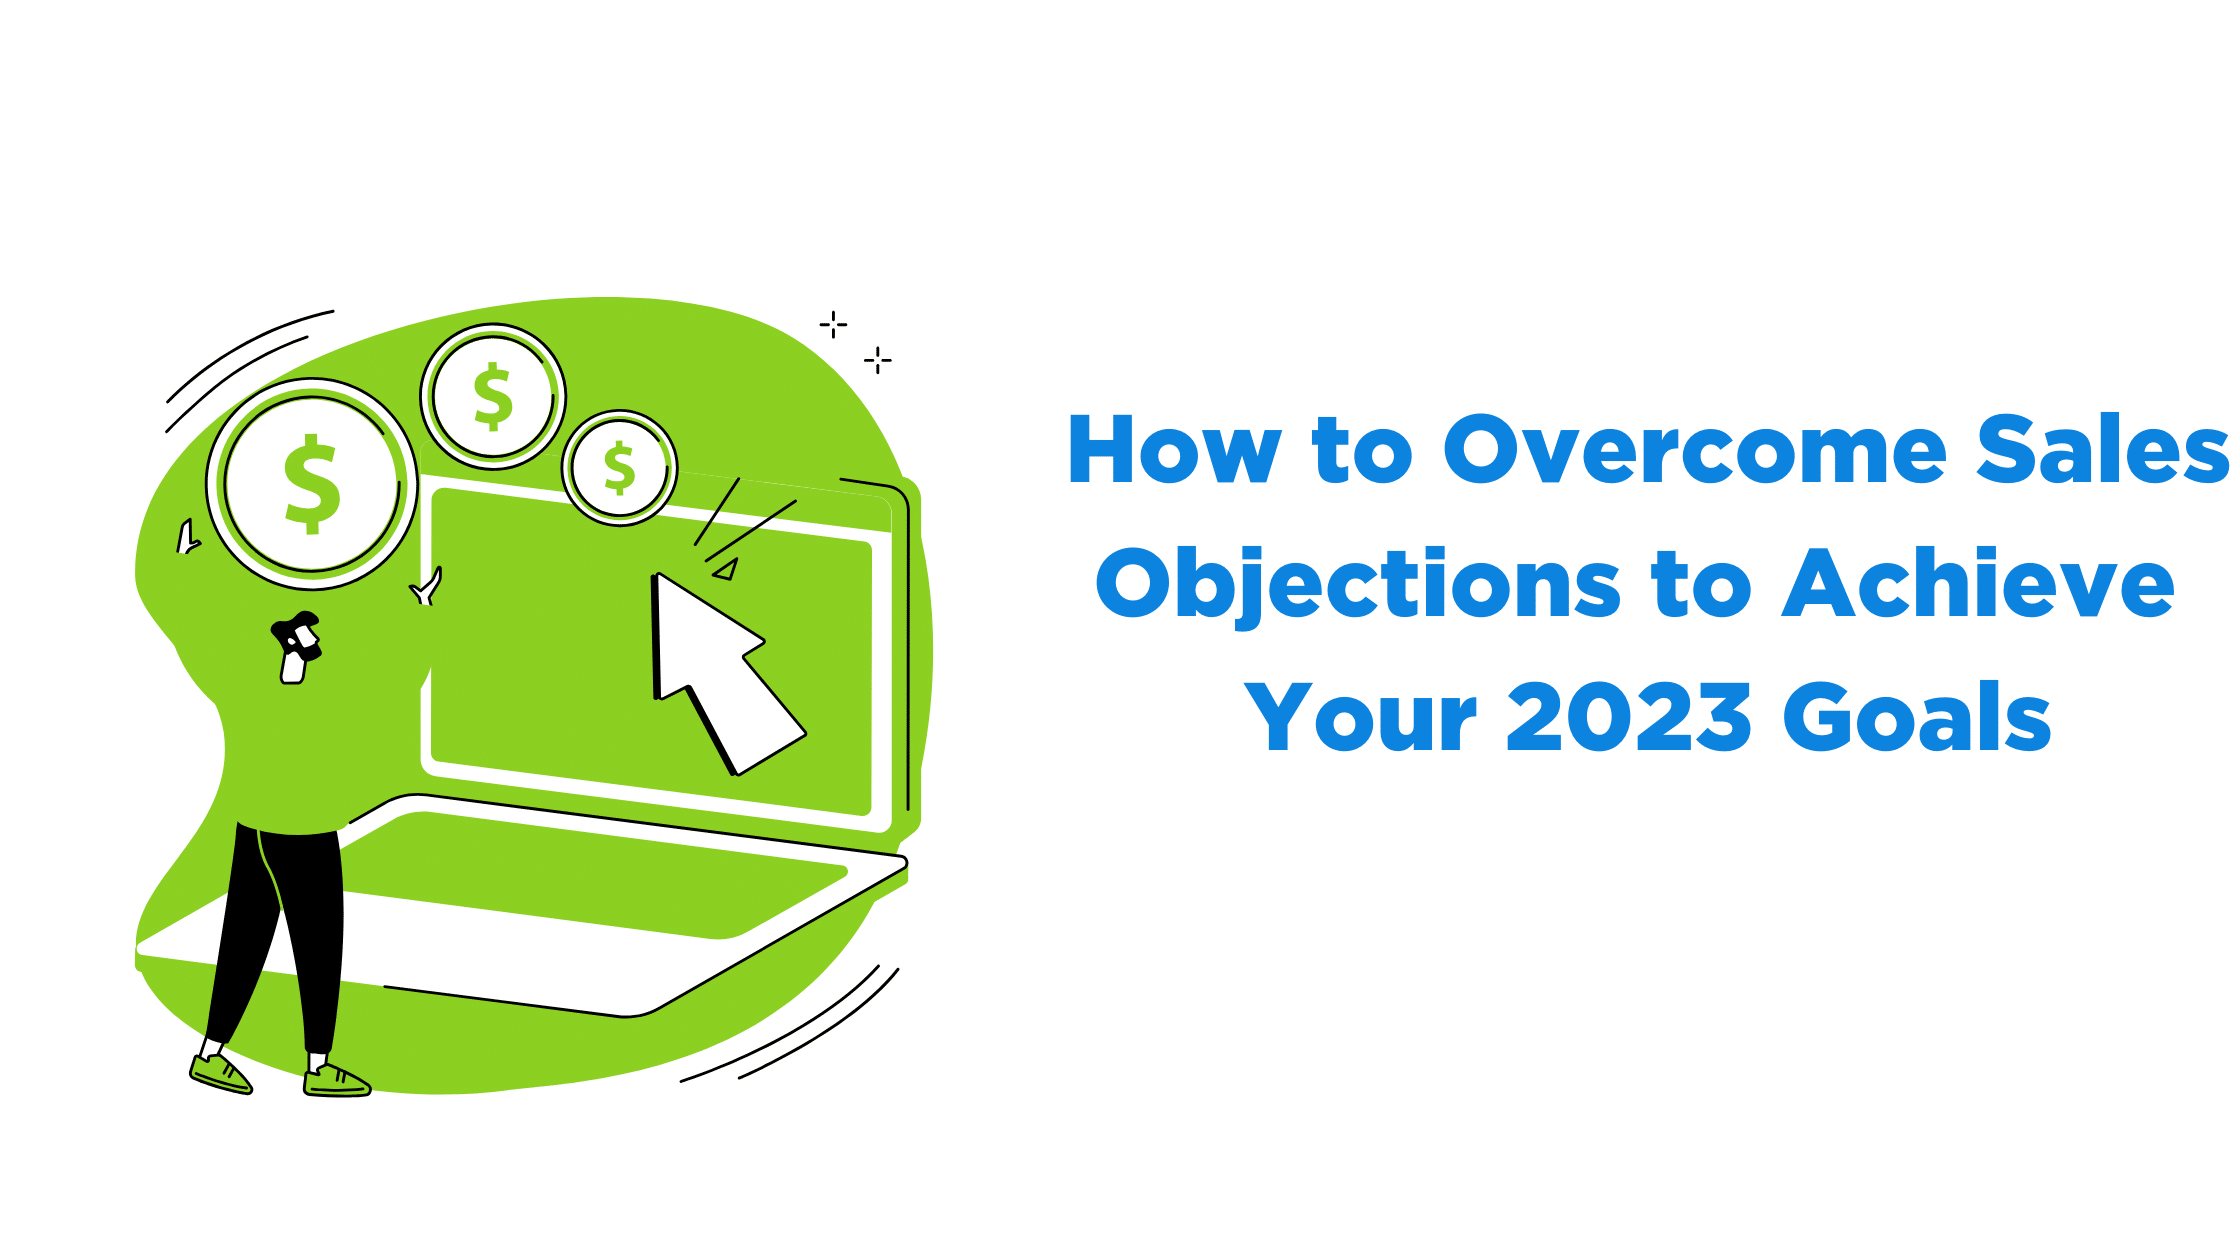 How to Overcome Sales Objections to Achieve Your 2023 Goals